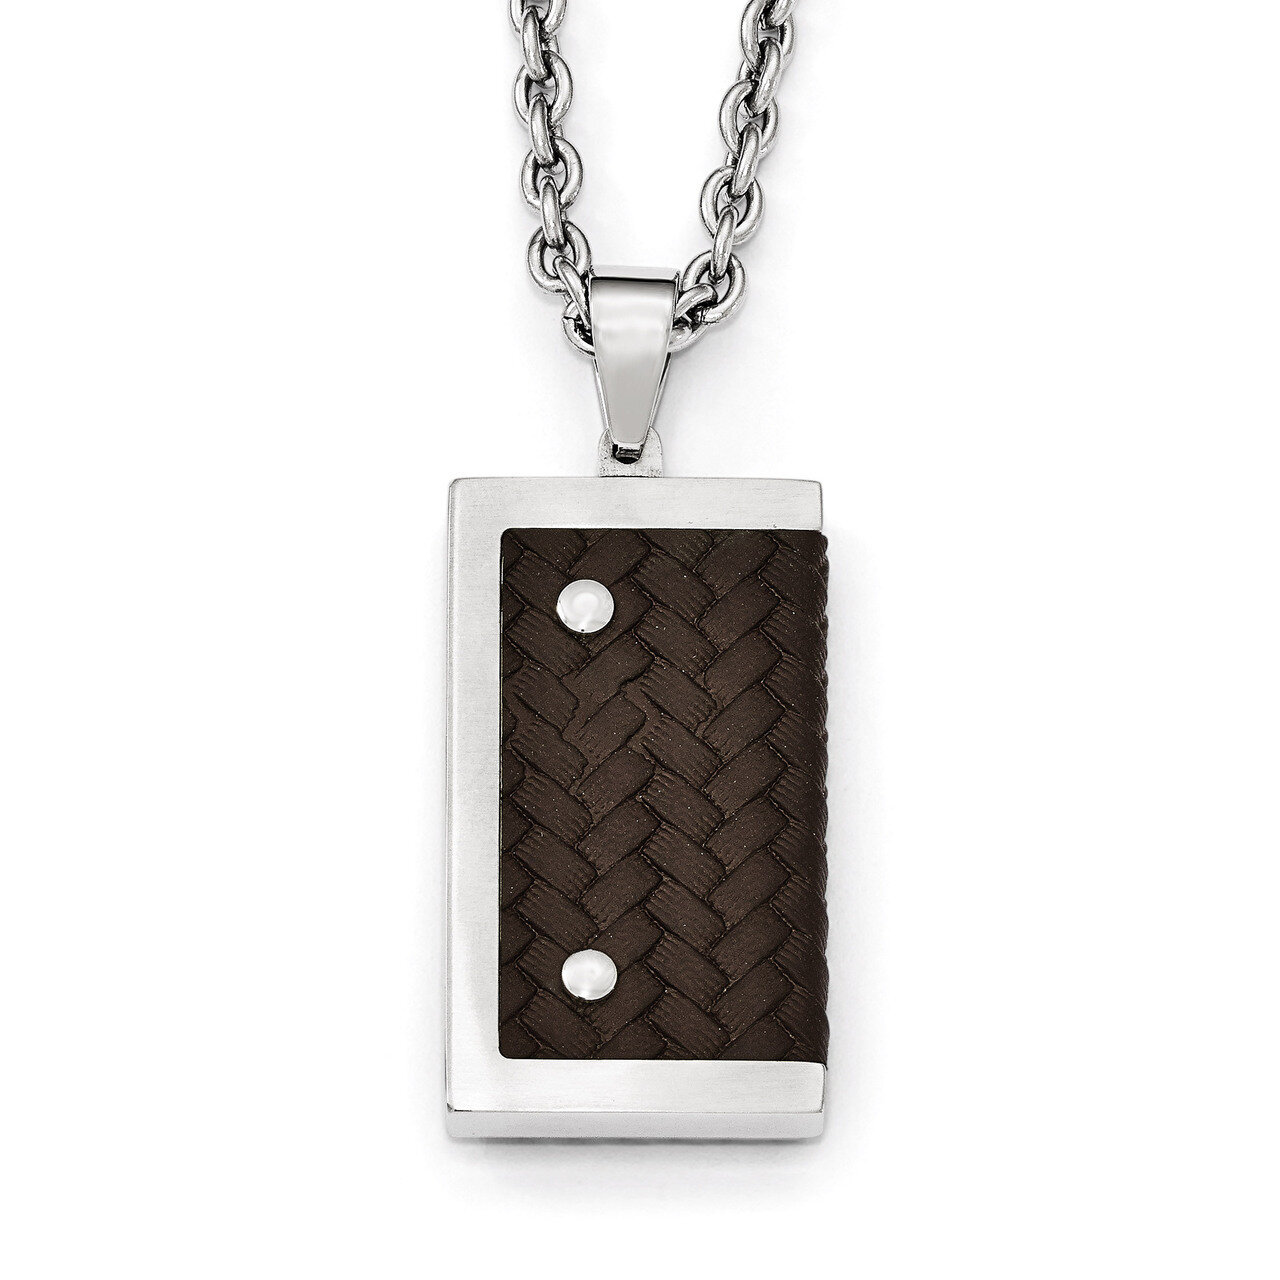 Reversible Brushed & Polished with Brown Leather Necklace - Stainless Steel SRN1993-24